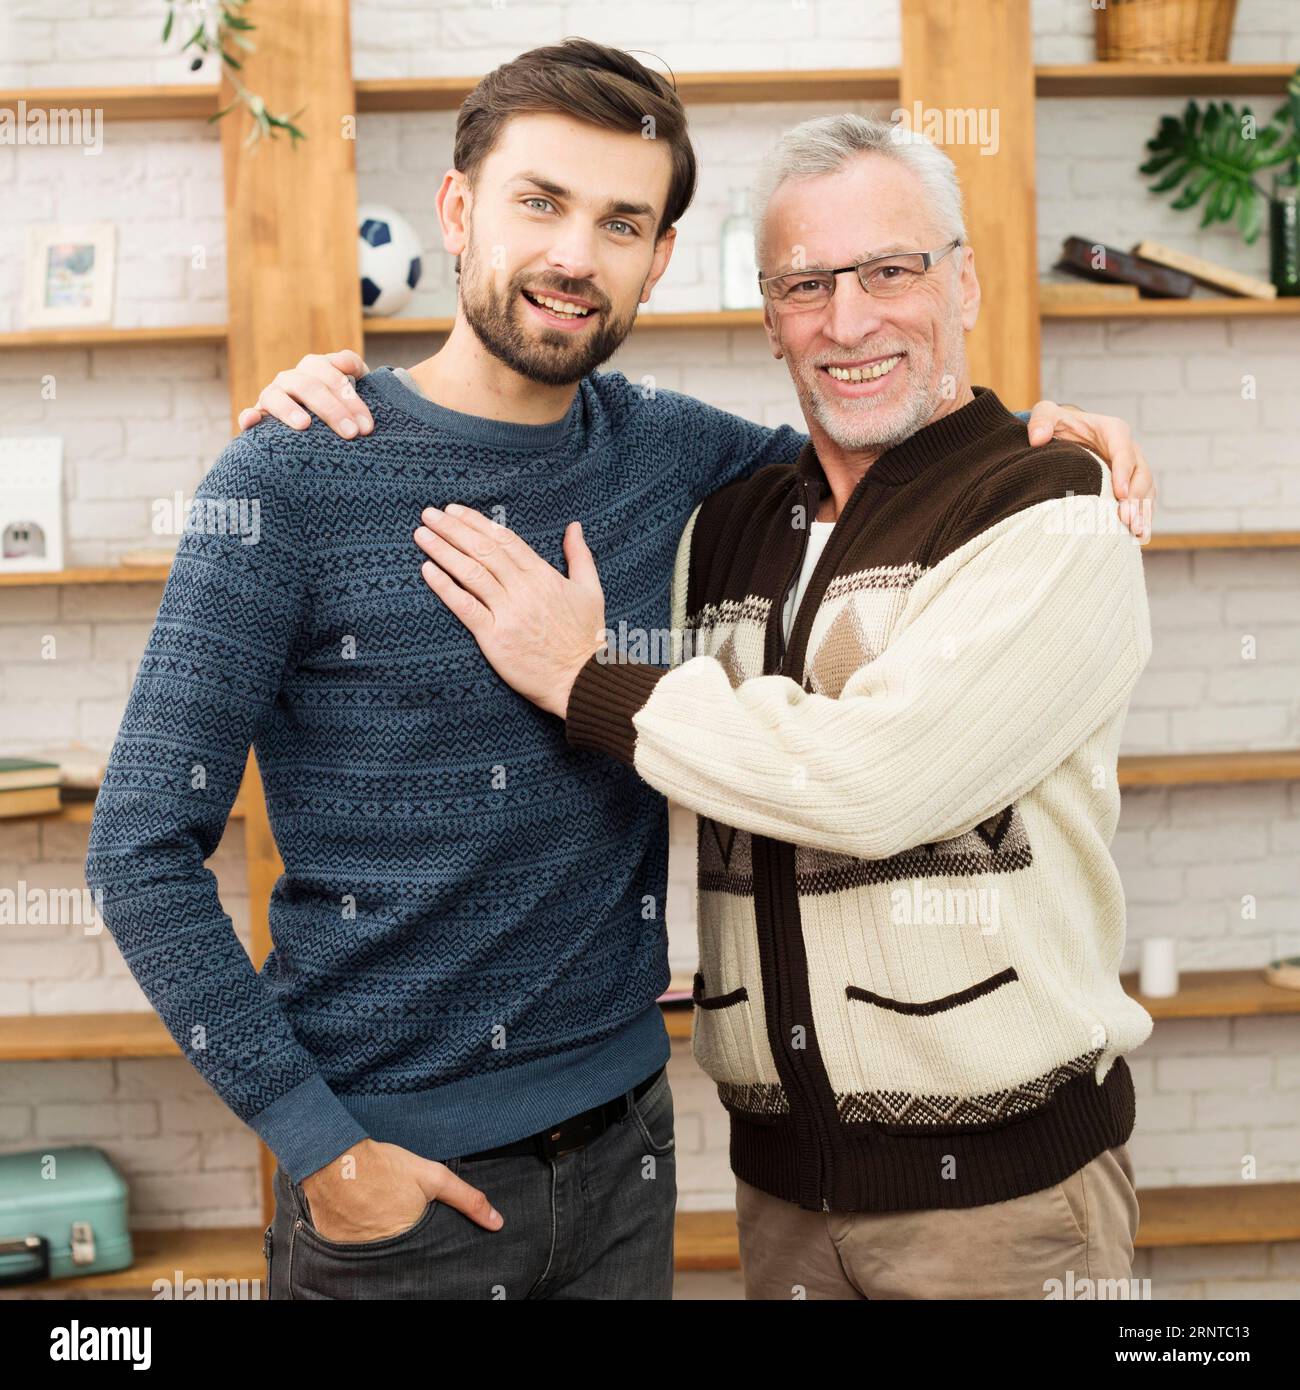 Aged happy man touching hugging with young smiling guy Stock Photo